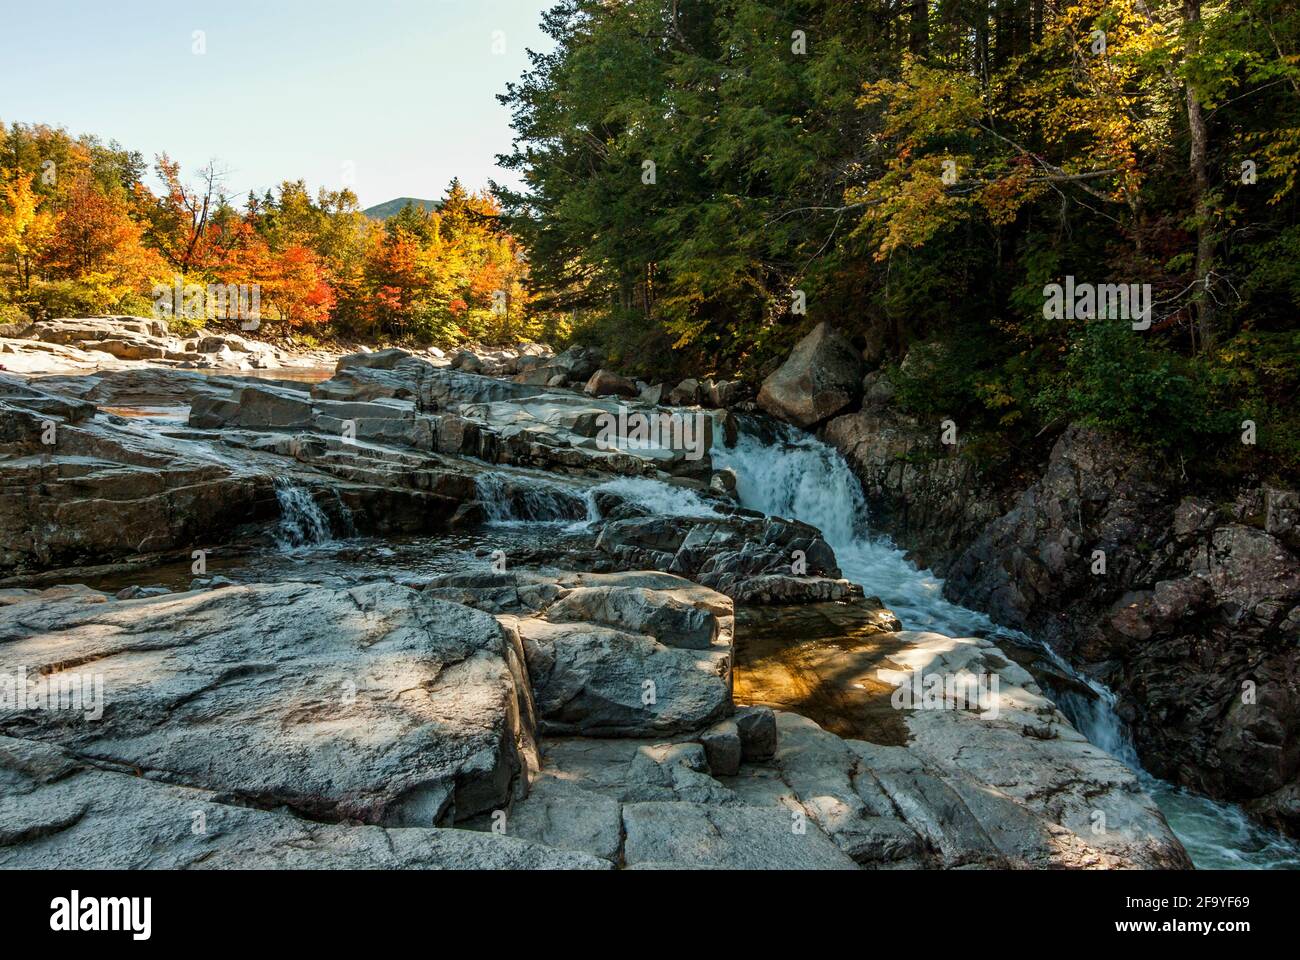 The rocky Pemigewasset River just off the Kancamagus Highway, New Hampshire, USA in autumn / fall. Stock Photo